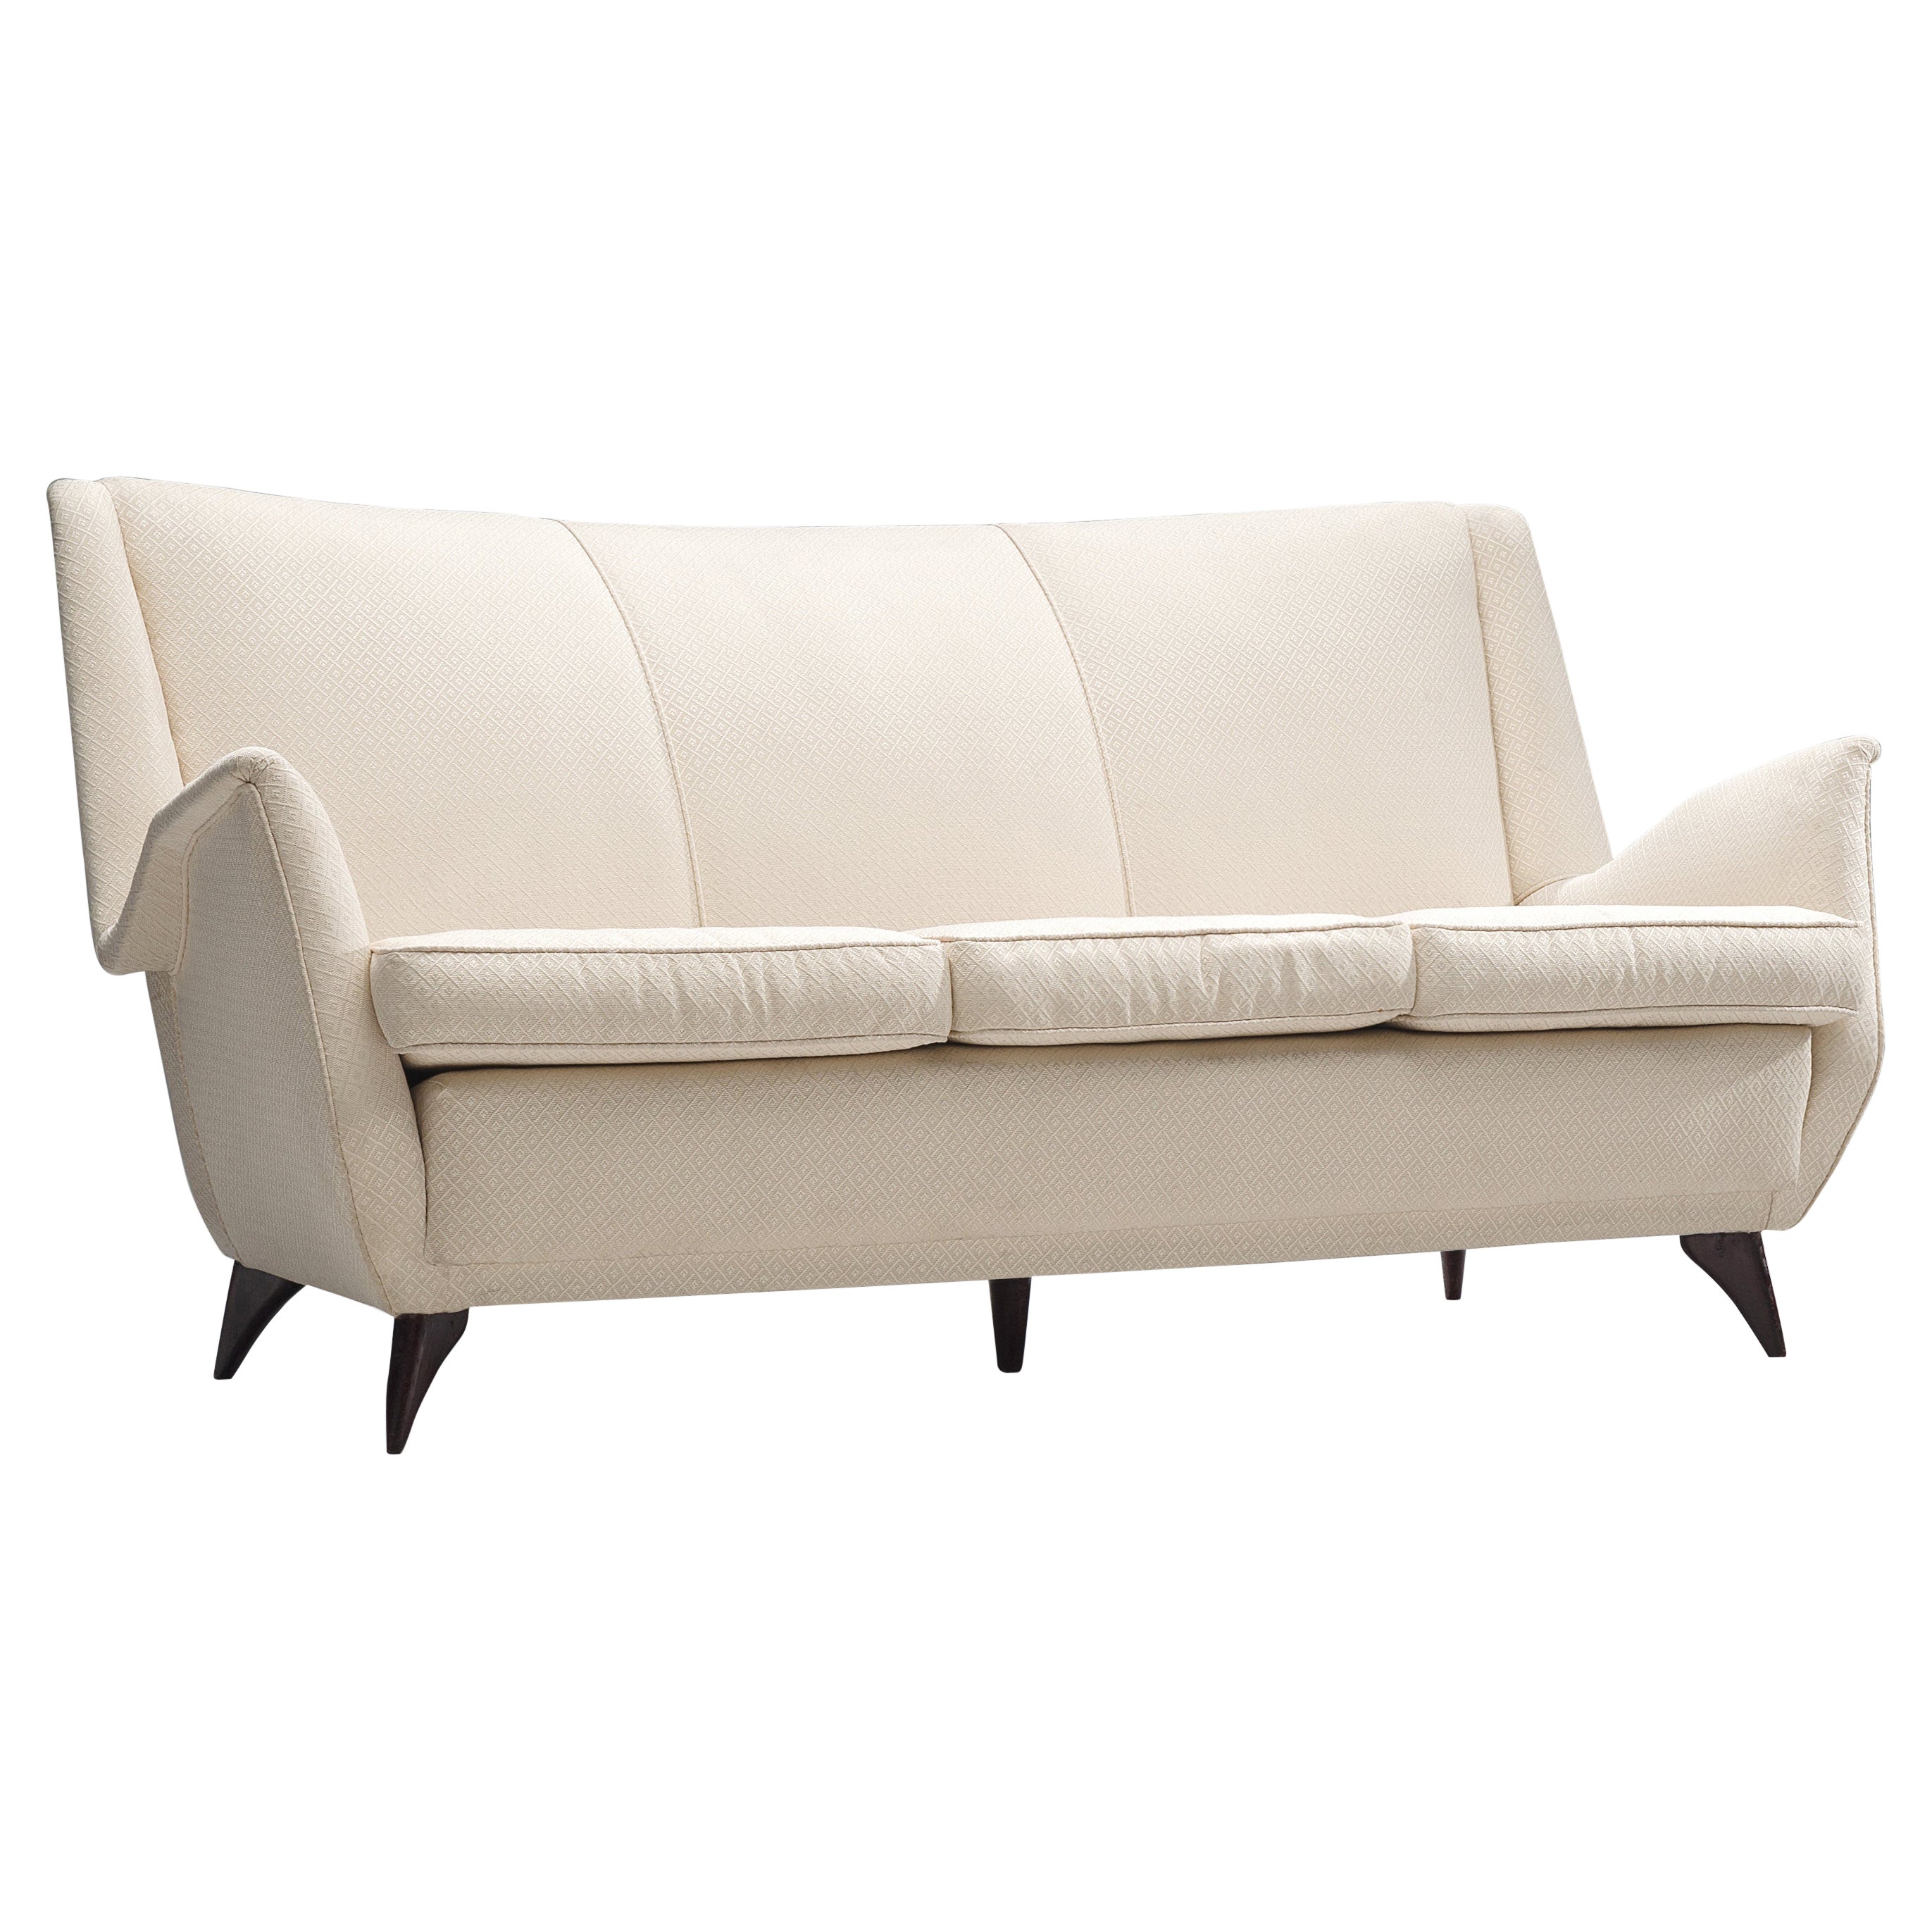 Italian Three-Seater Sofa in Off-White Upholstery  For Sale